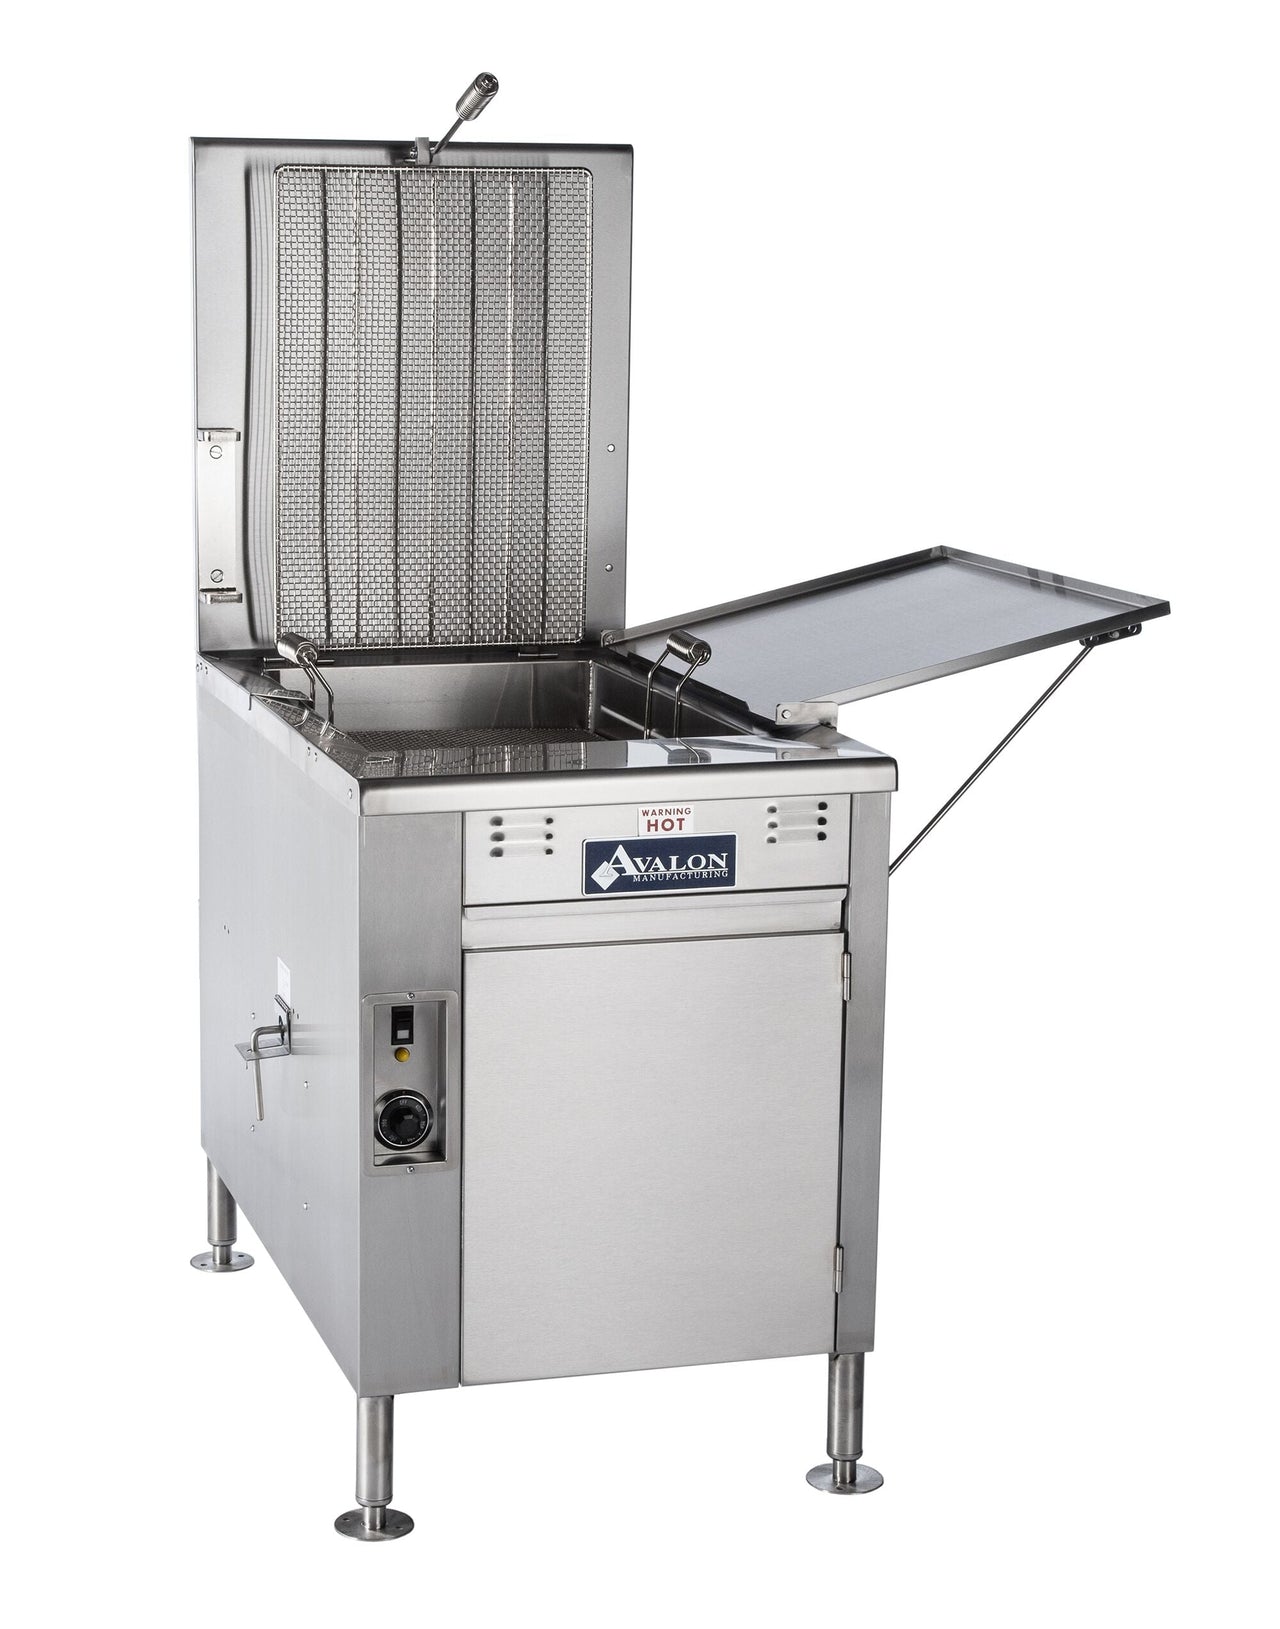 20" x 20" Donut Fryer, Natural Gas, Electronic Ignition, Left Side Drain Board